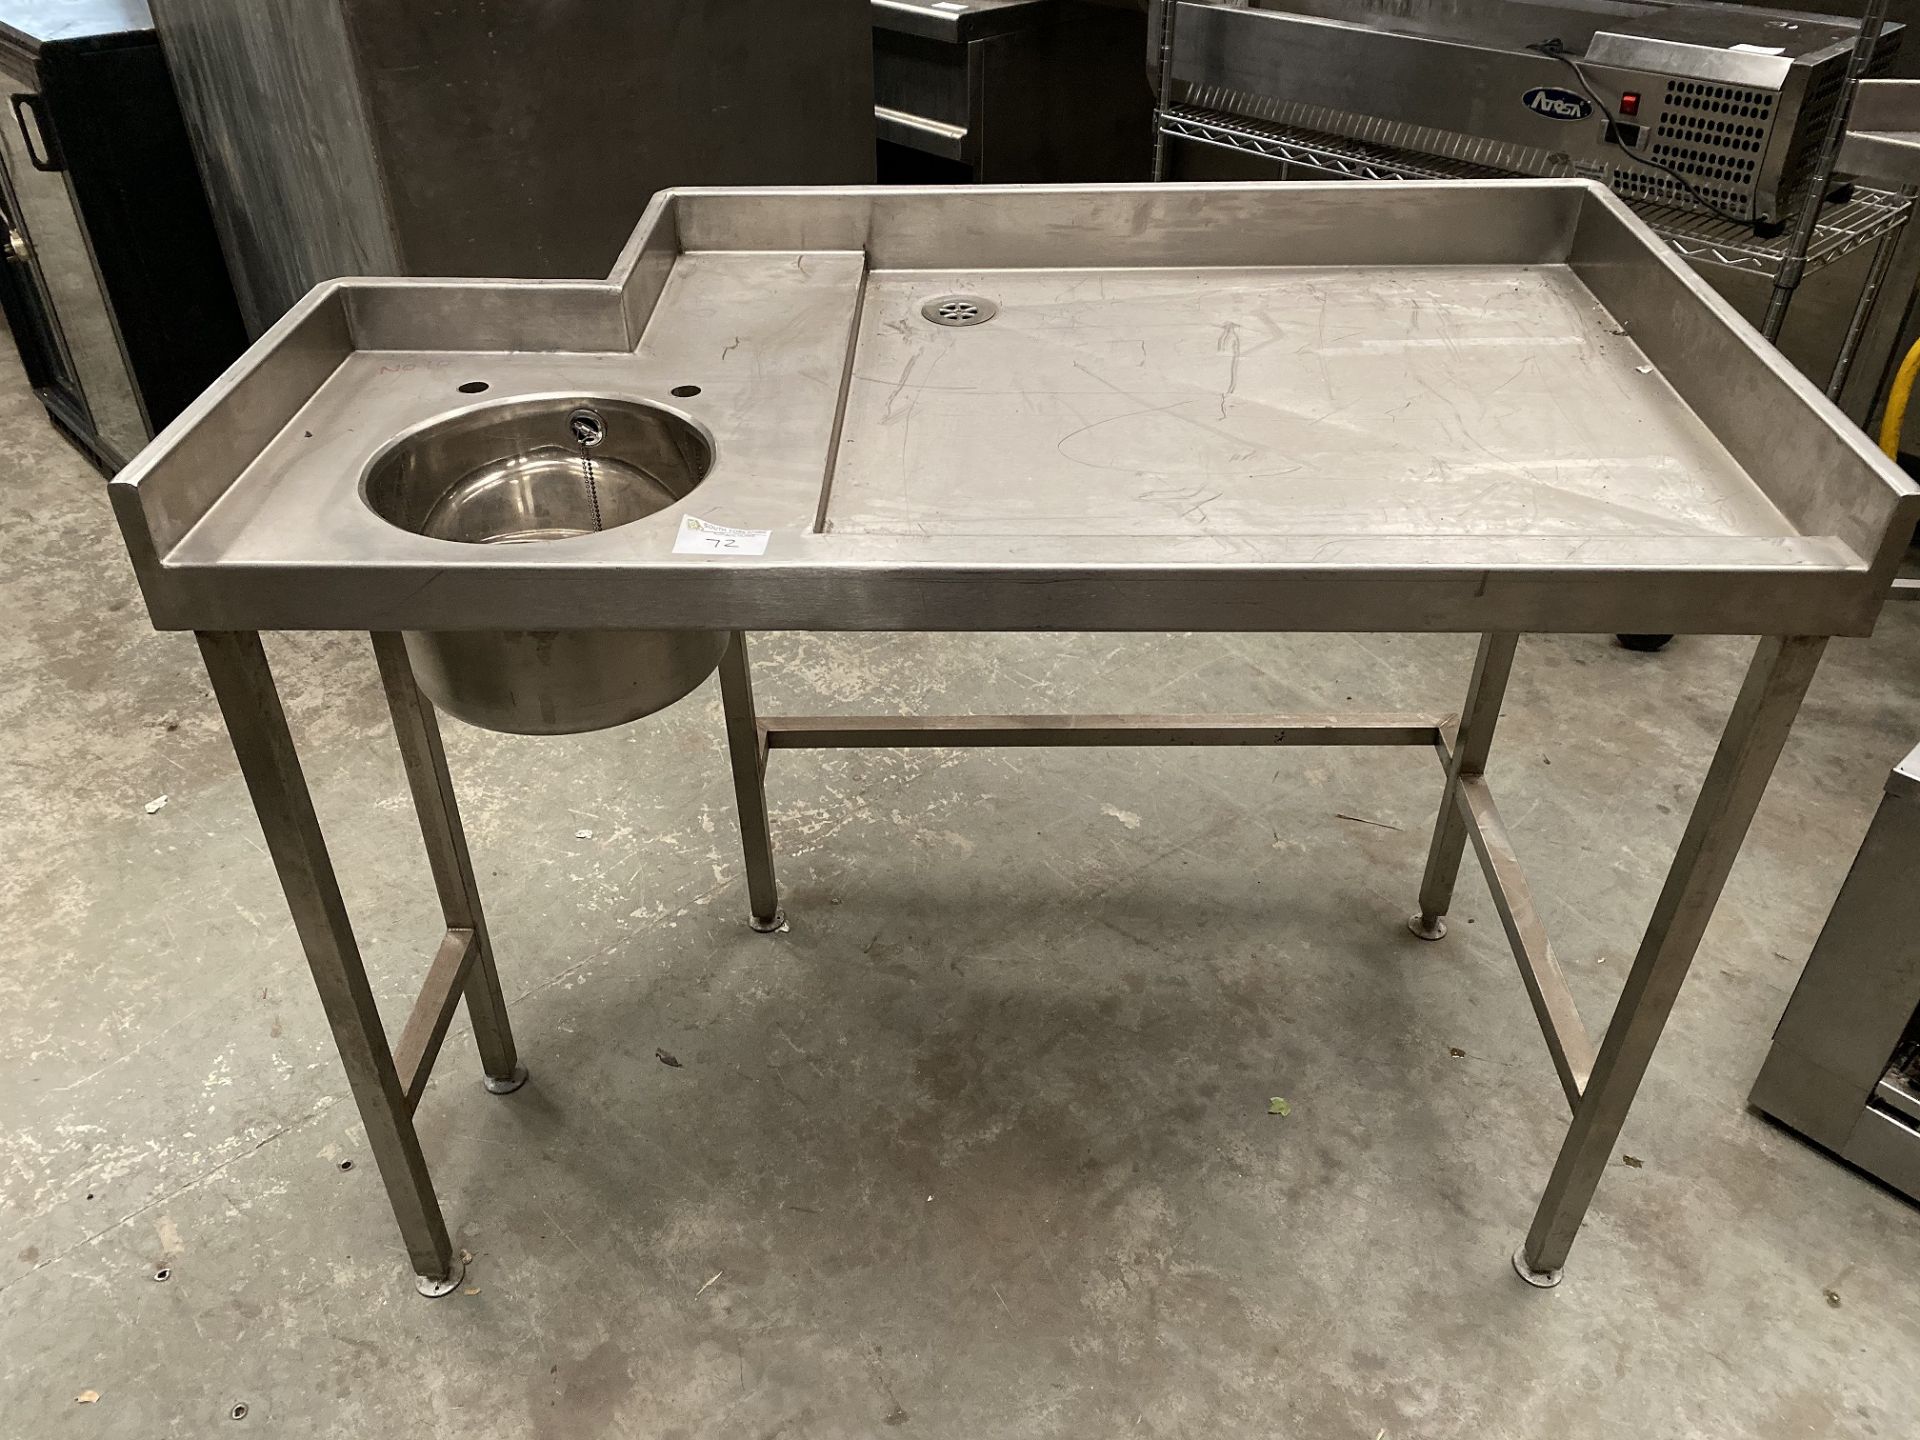 Stainless Steel Sink and Cleans Unit